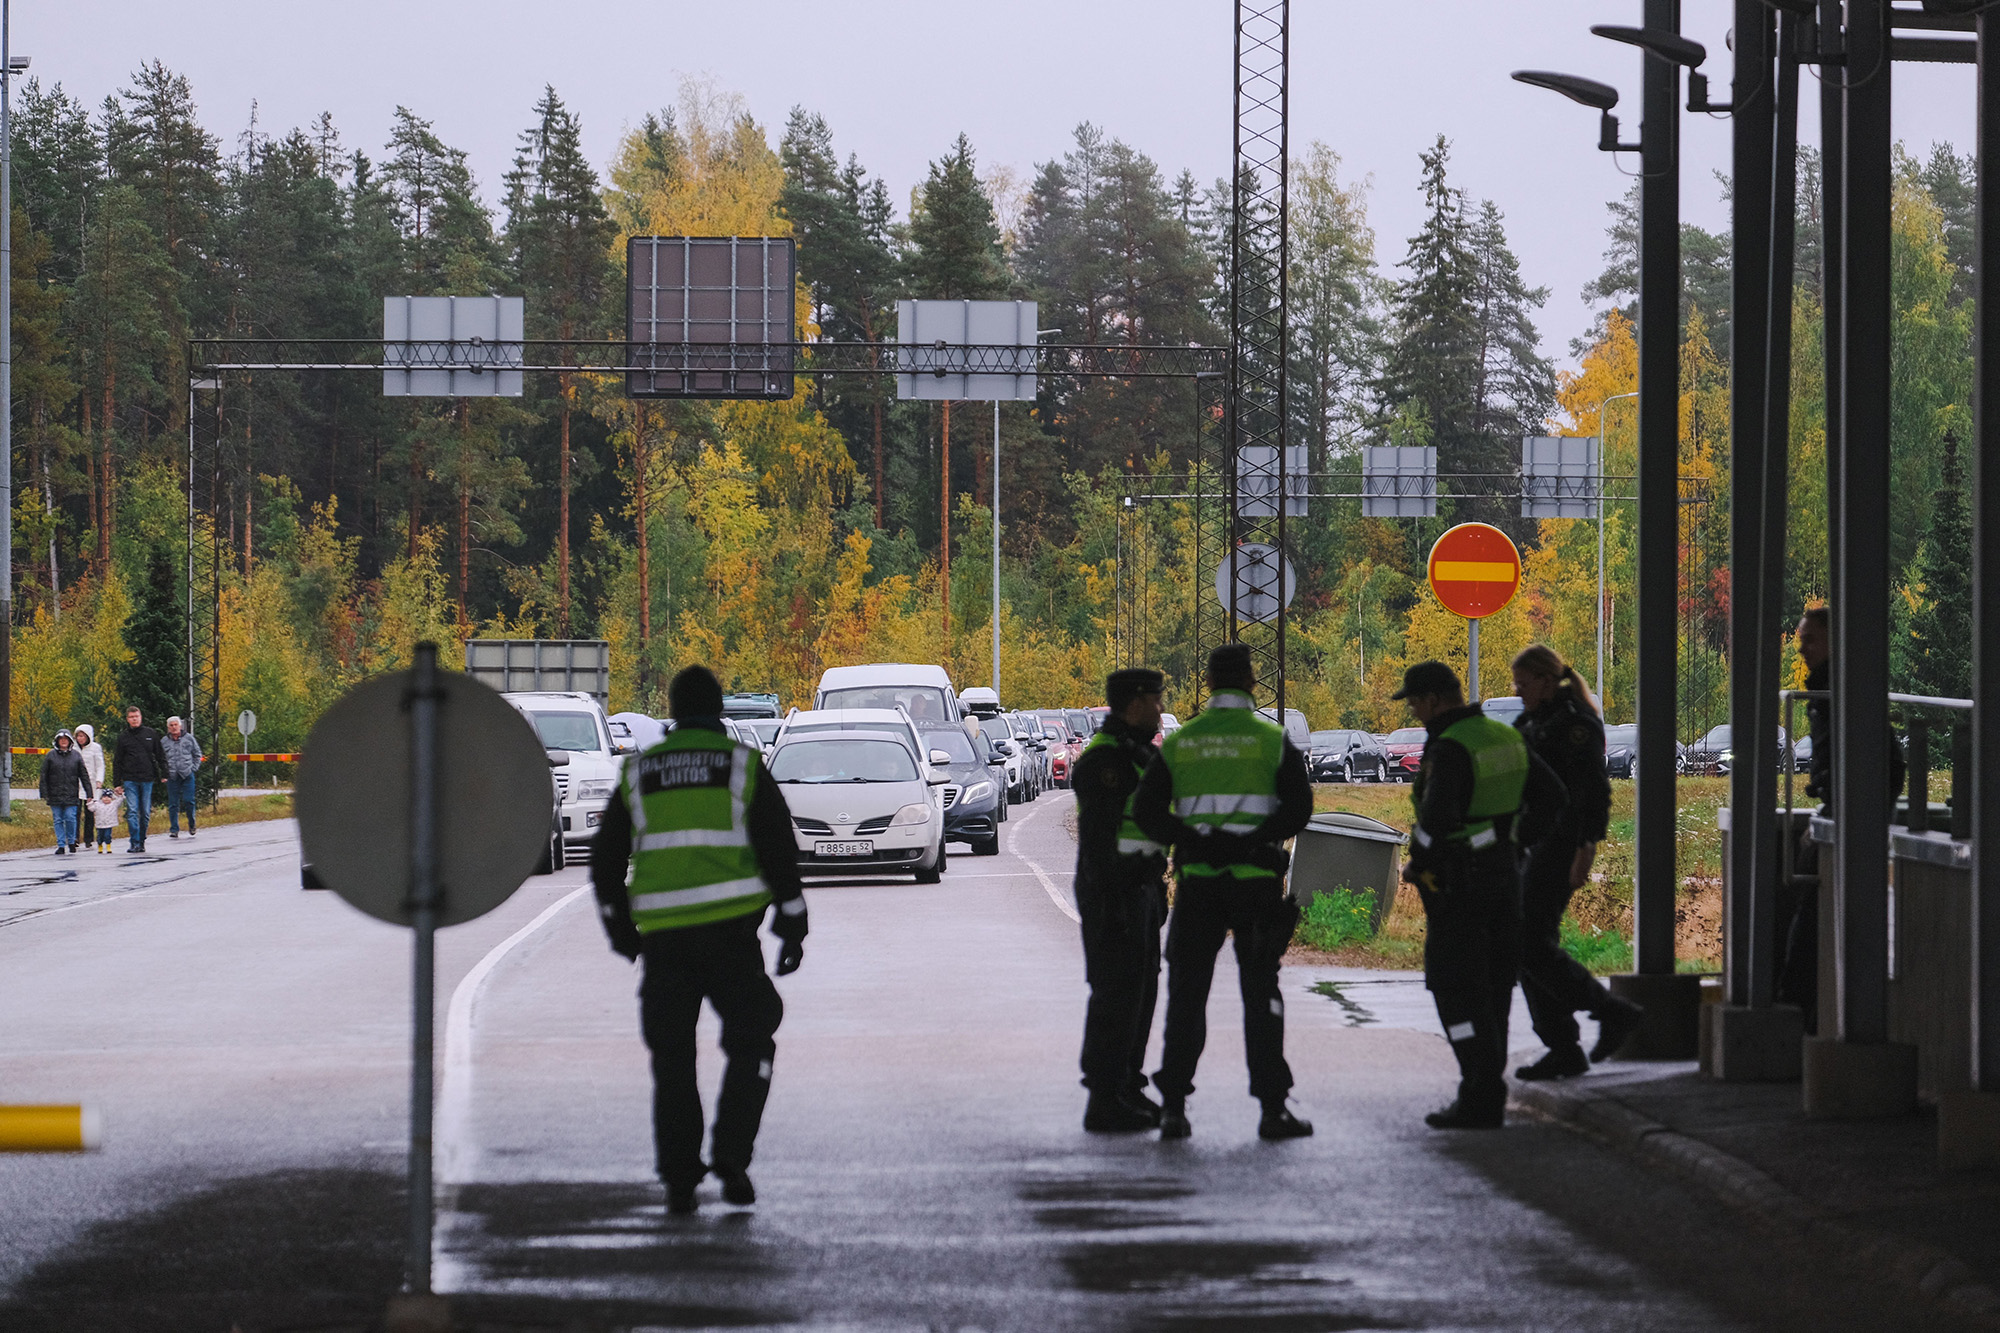 Finnish border guard officers look at cars queueing at the Vaalimaa border crossing between Finland and the Russian Federation on September 30.